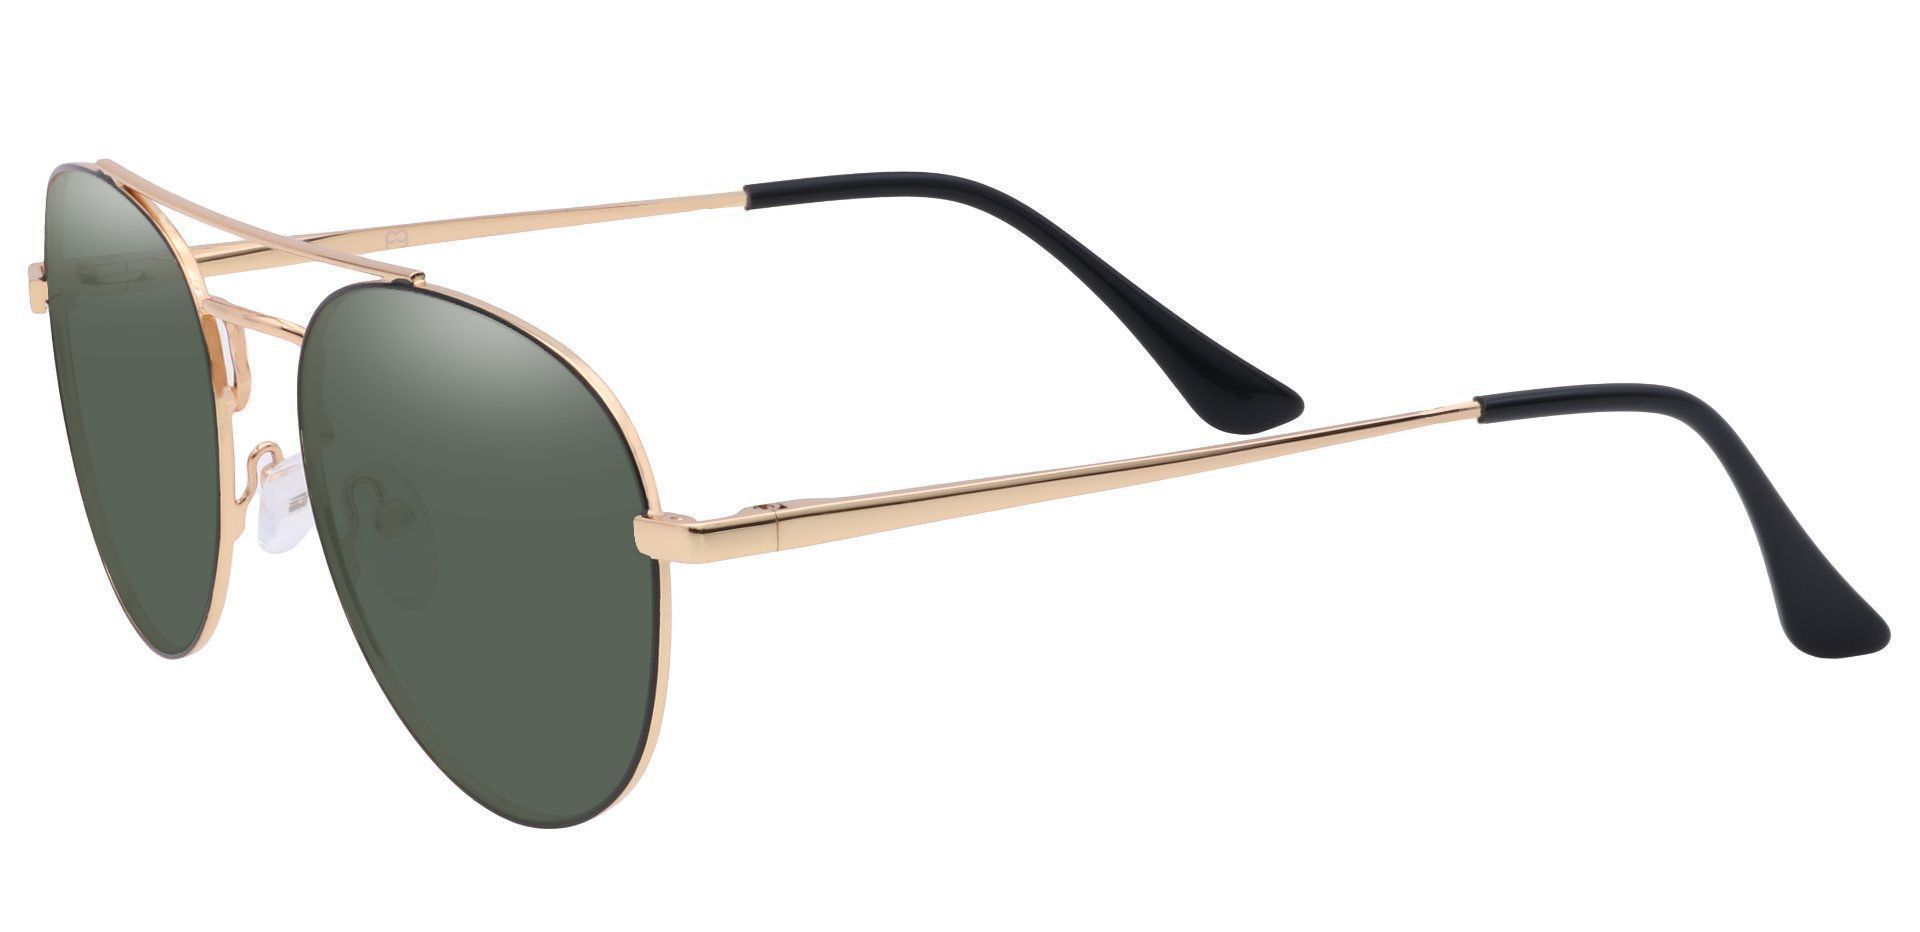 Trapp Aviator Non-Rx Sunglasses - Gold Frame With Green Lenses